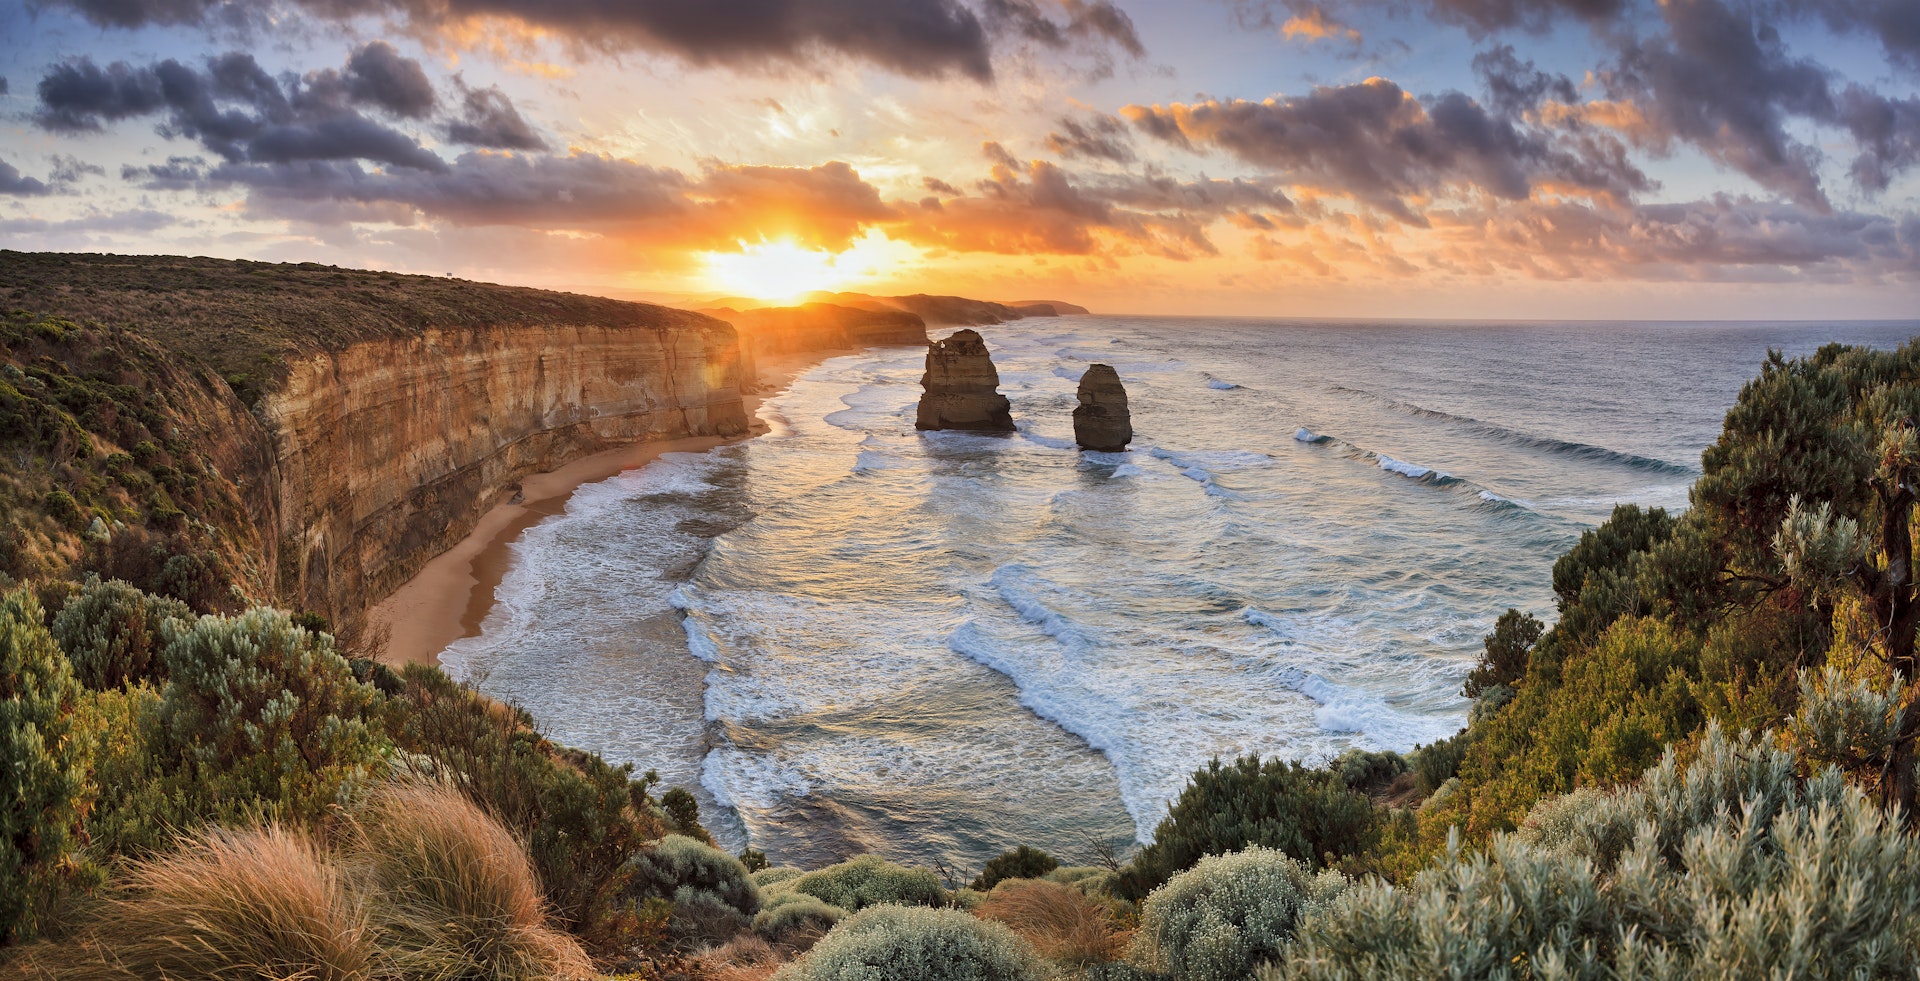 View of the Twelve Apostles rock formations from the Great Ocean Road